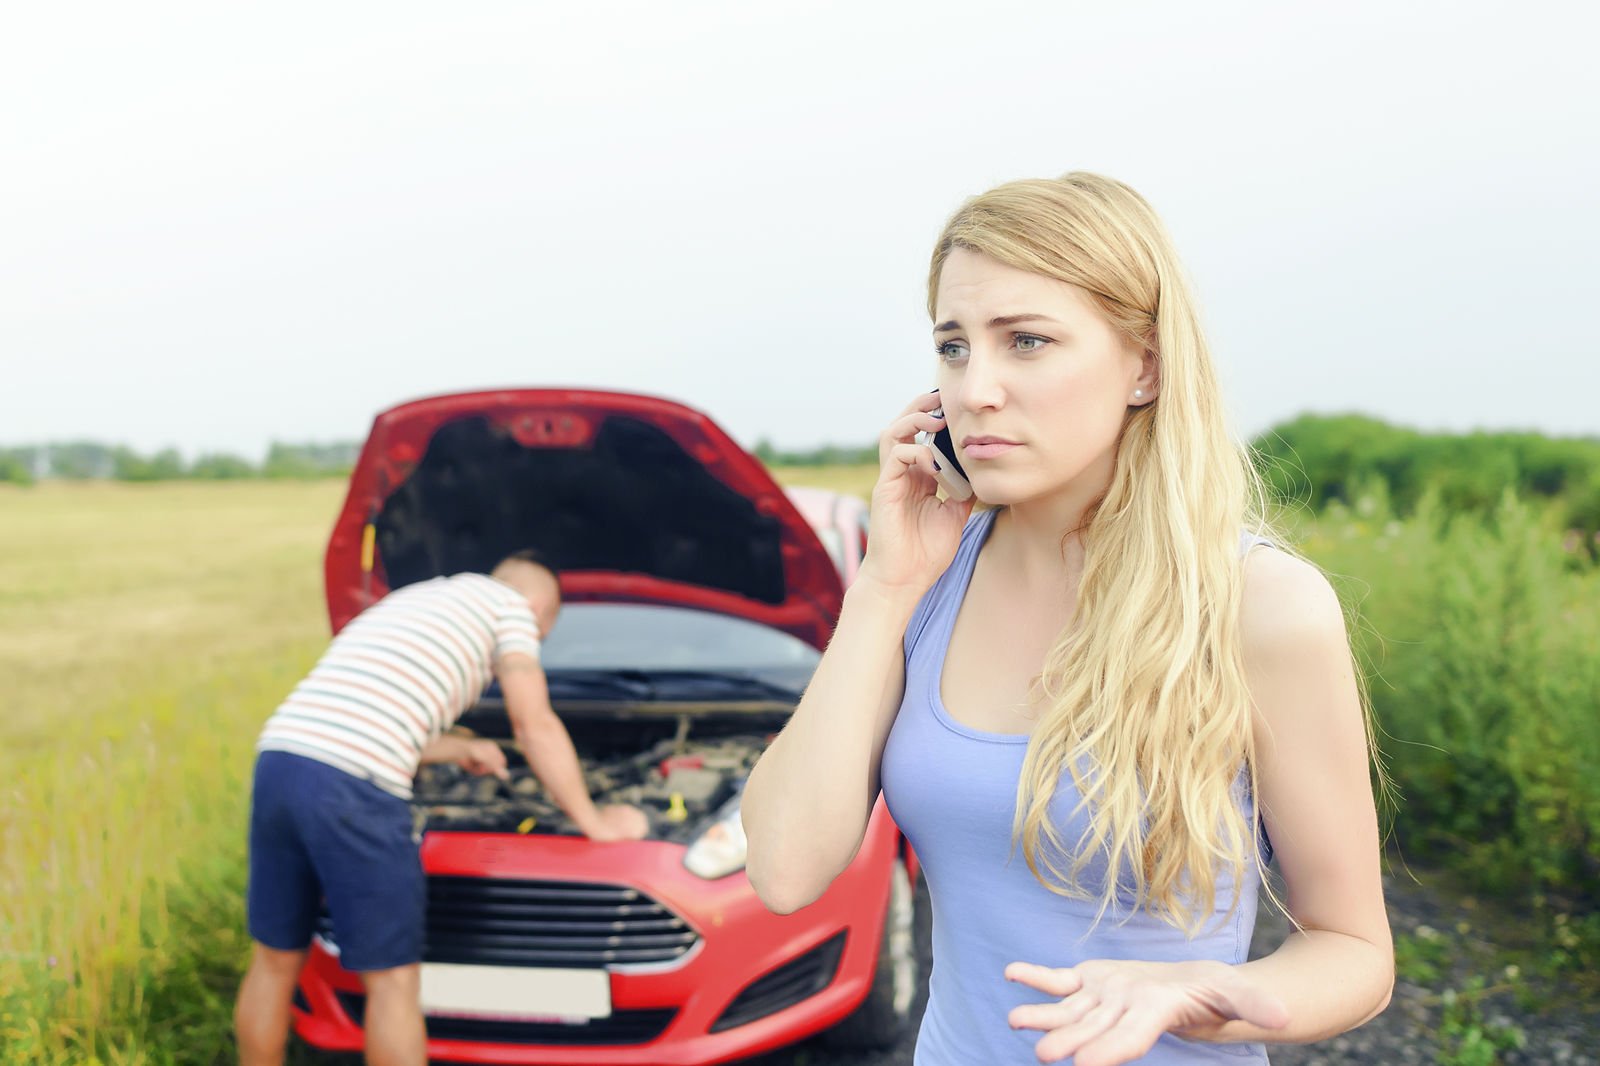 Does insurance cover my car breaking down?